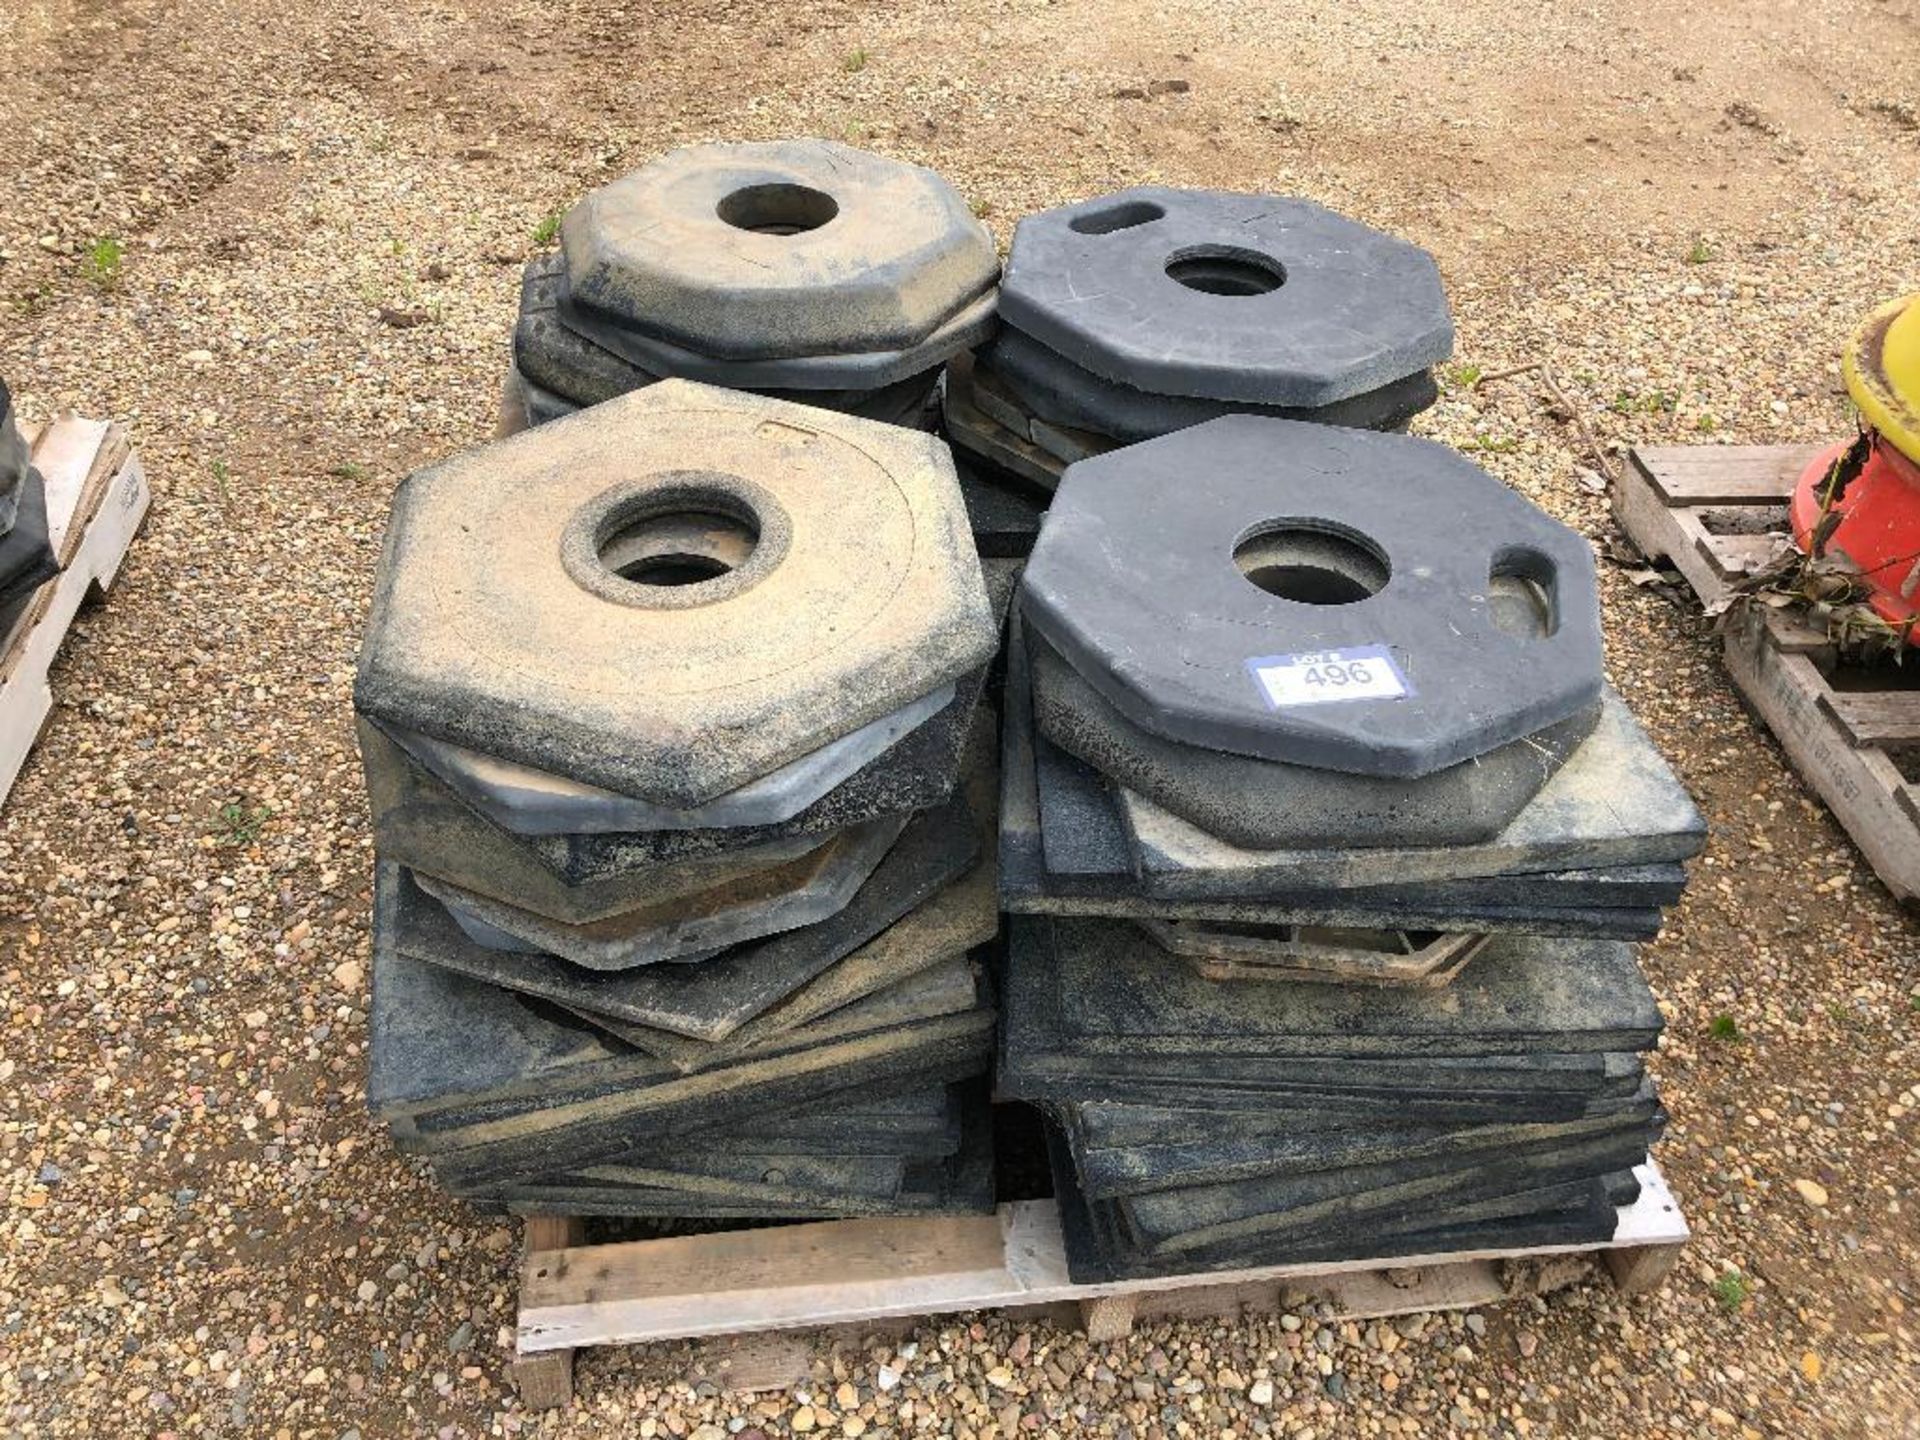 Pallet of Asst. Delineator Bases